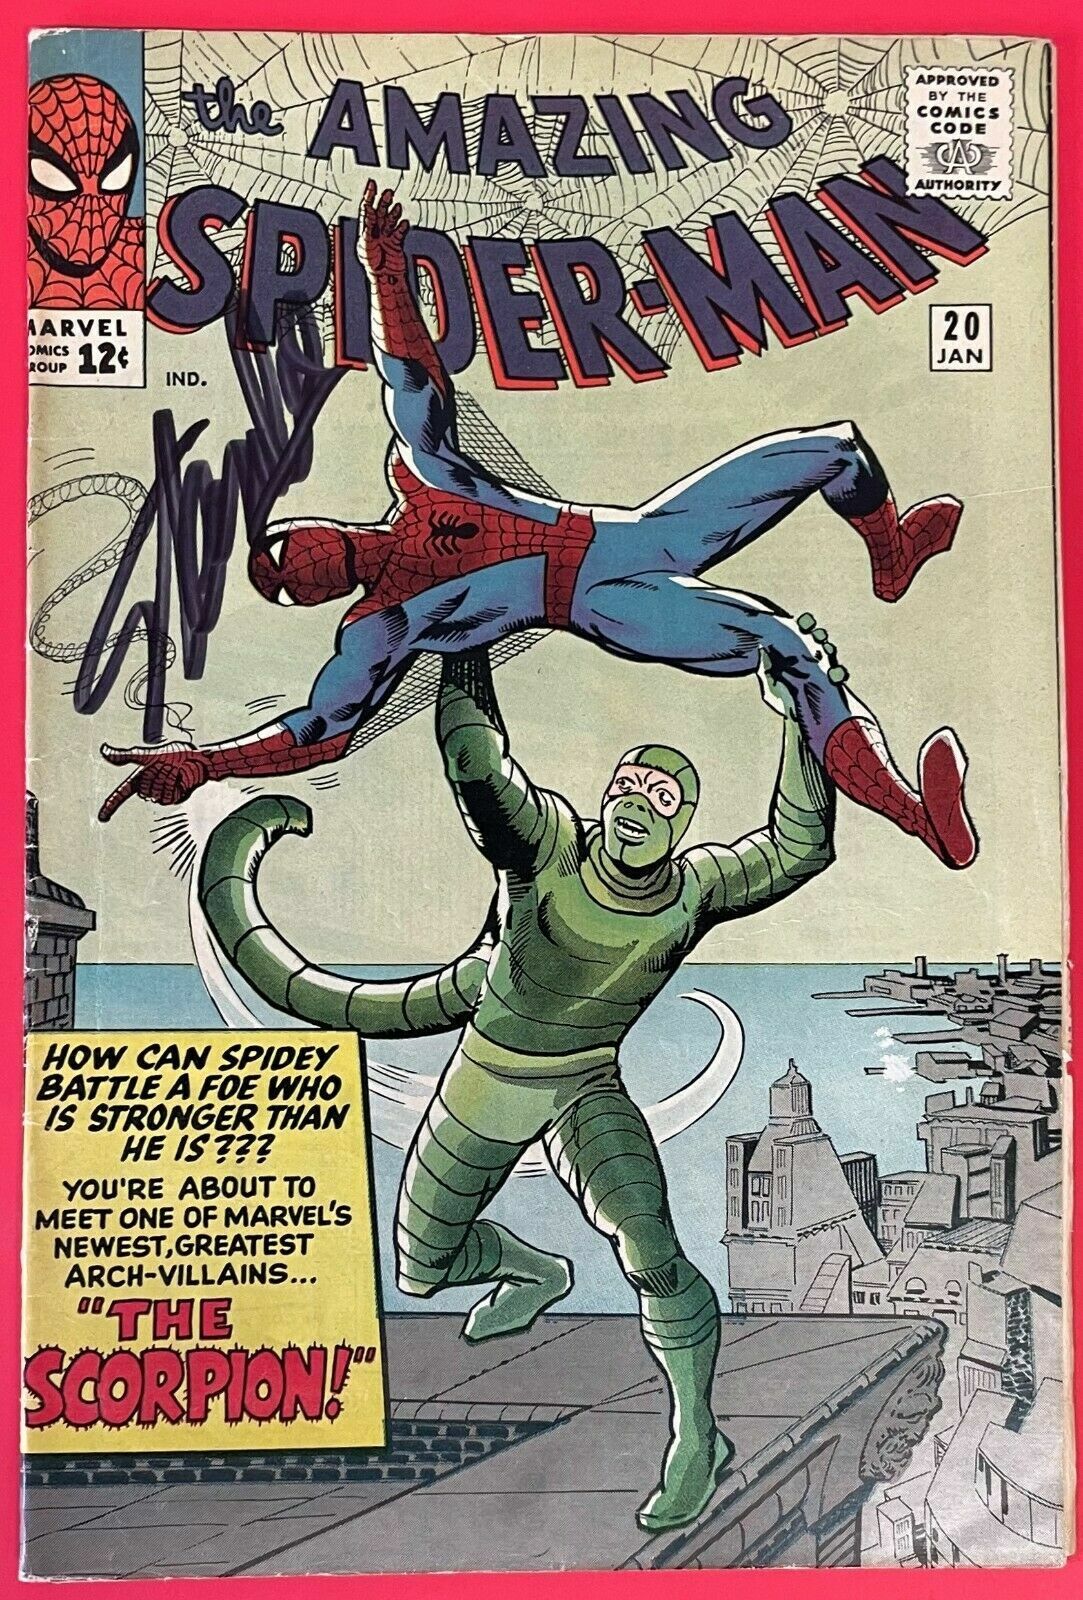 The Amazing Spiderman #20, First Appearance Of Scorpion, Signed by Stan Lee